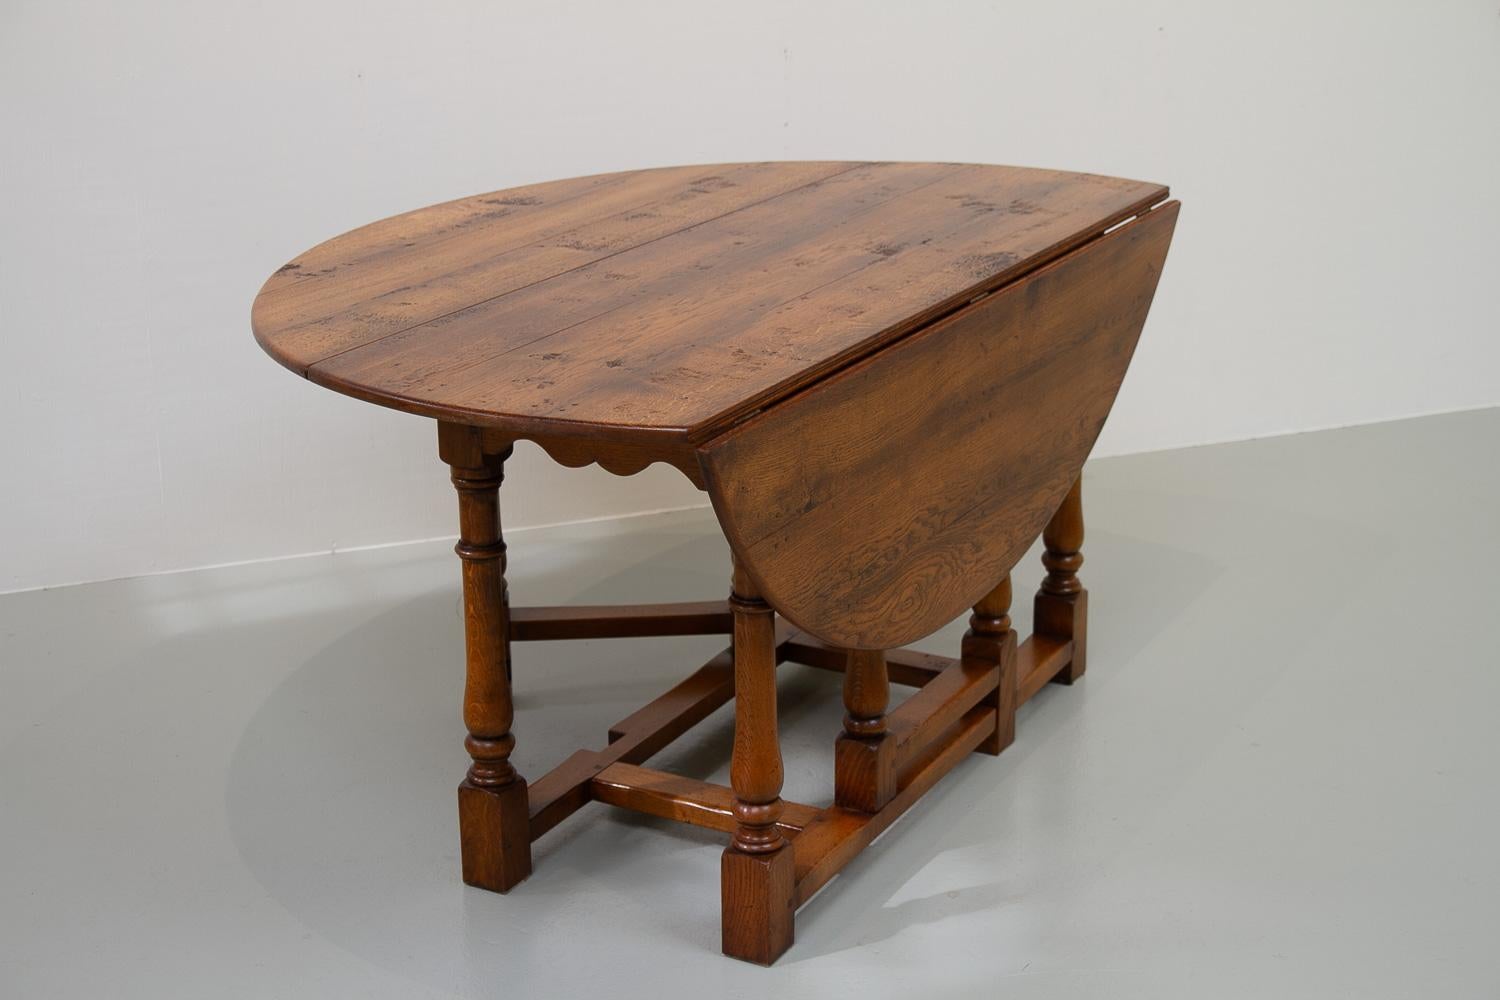 Large Gateleg dining Table in oak with drop leaf top.
Table top is made of solid hand planed oak planks with visible pegs along the joints. Base with turned legs in solid oak. Two legs pivots to support the leaves, hence the name gateleg.
The